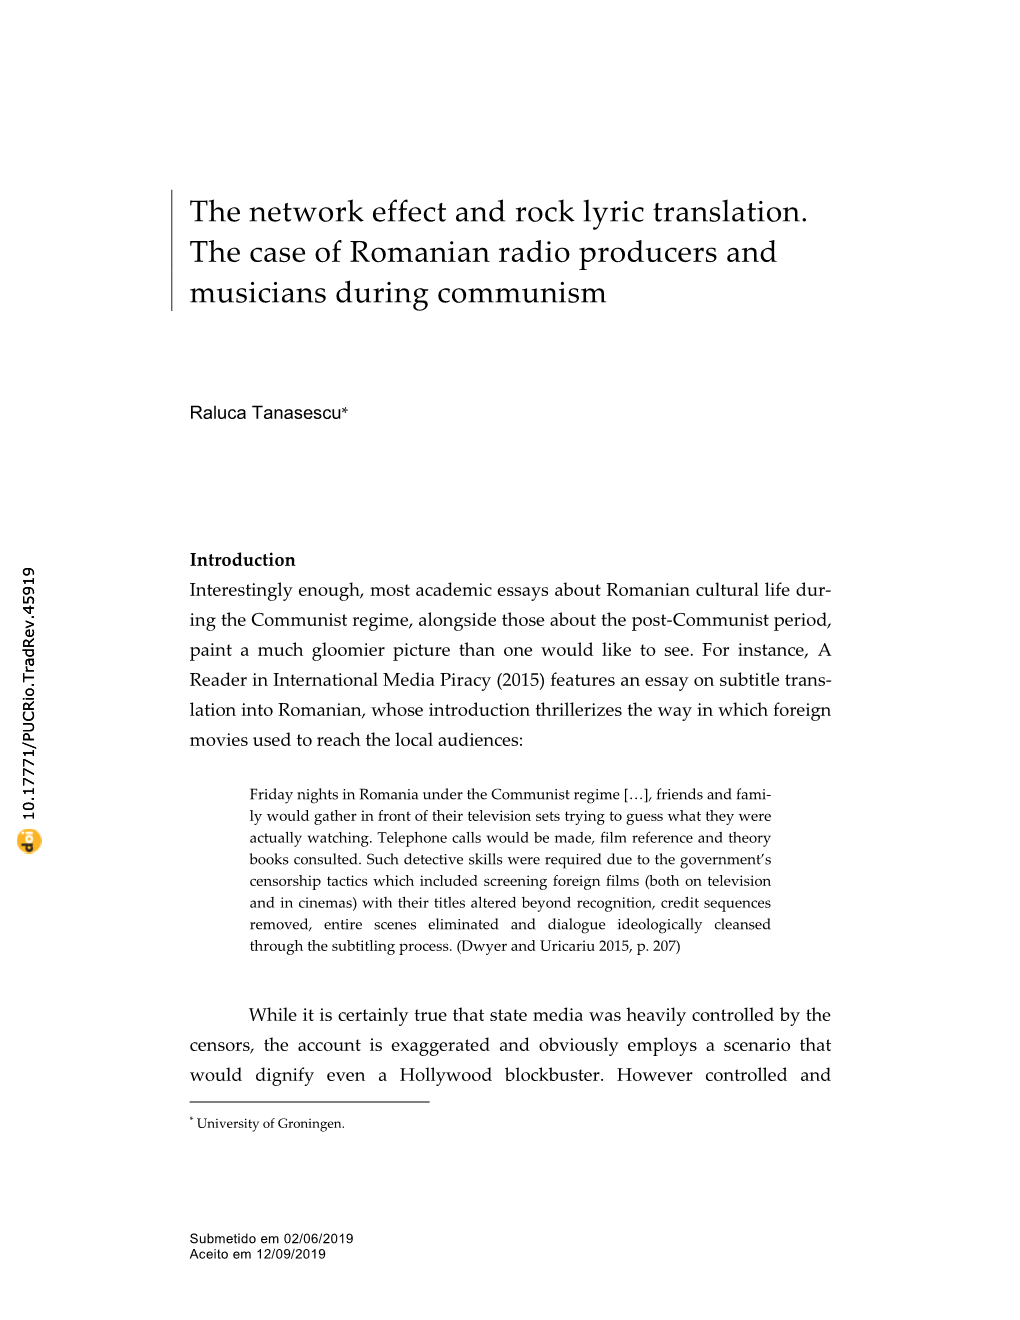 The Network Effect and Rock Lyric Translation. the Case of Romanian Radio Producers and Musicians During Communism